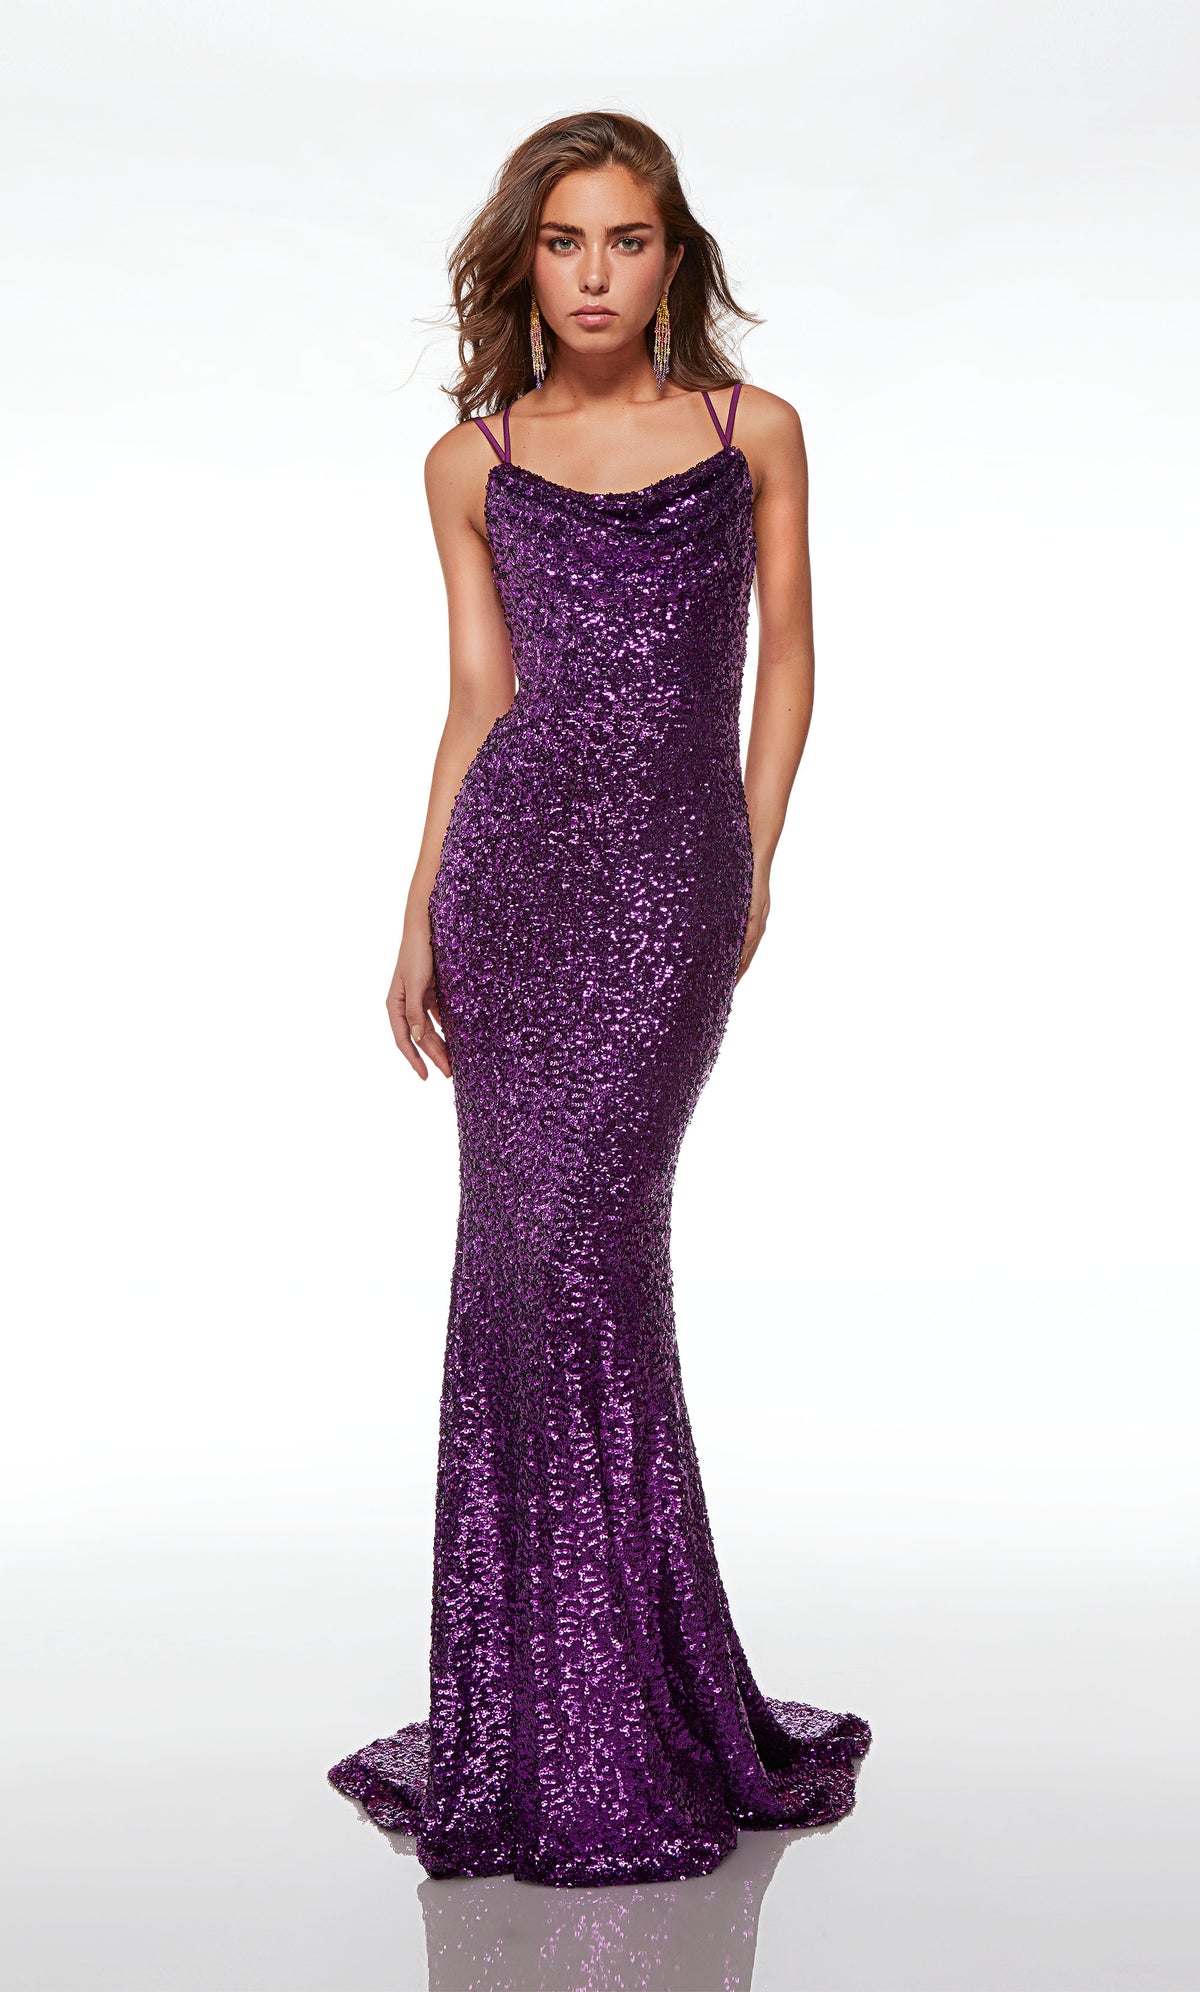 Purple prom dress: Sequin embellished, scooped cowl neckline, dual adjustable straps, crisscross lace-up back, and train for an stunning look.